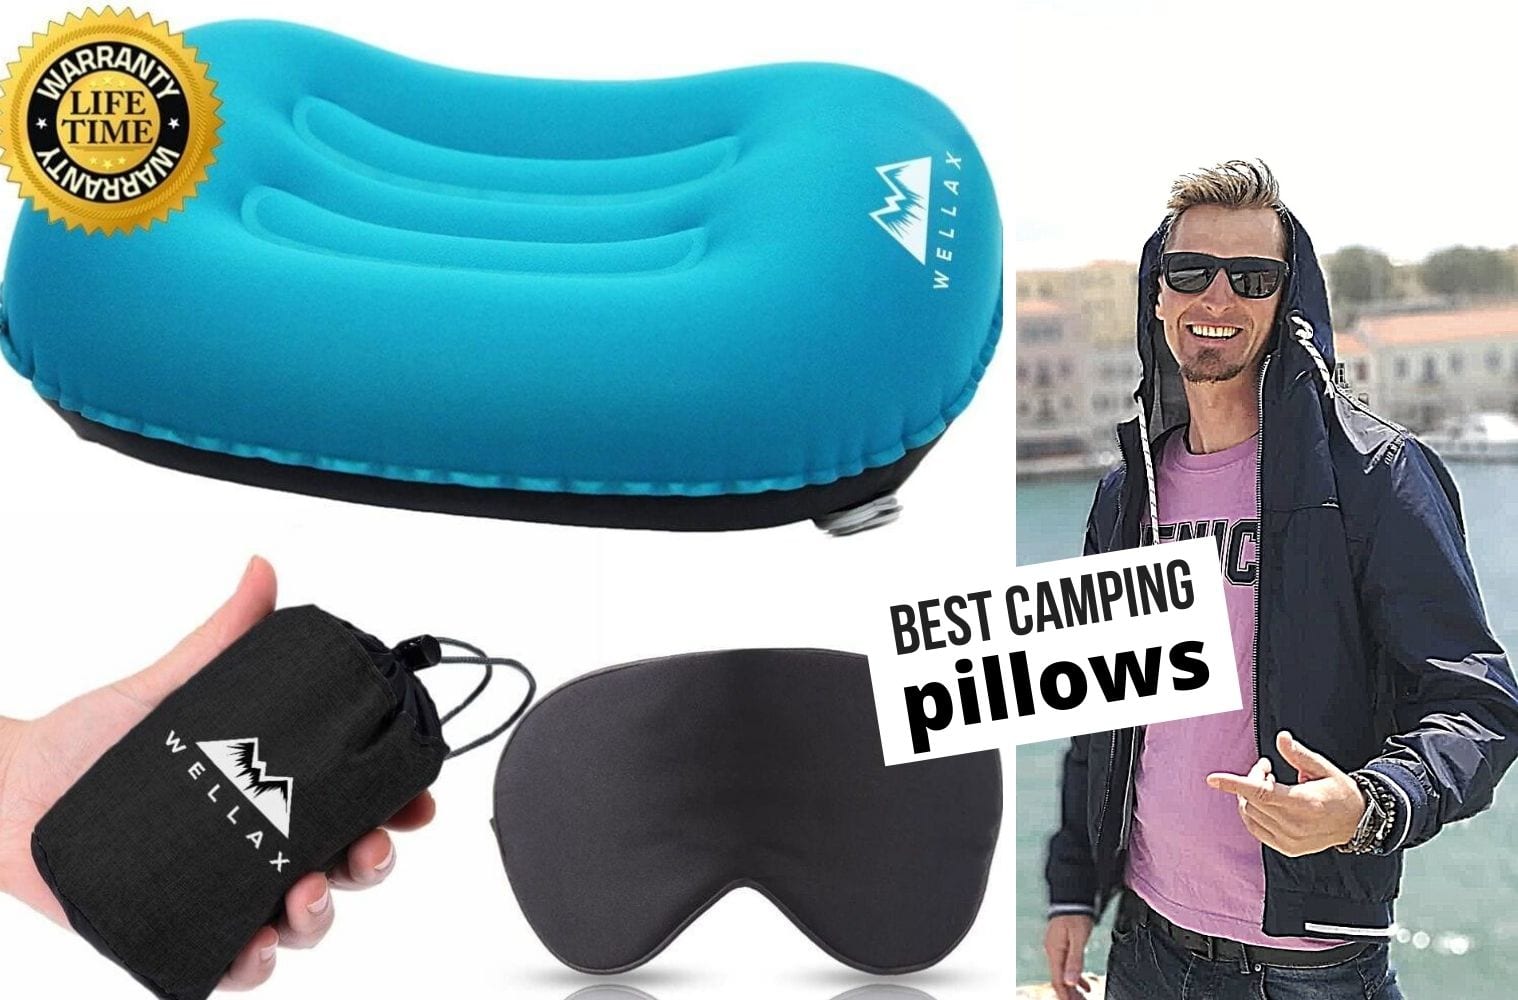 Sky Blue Travel Inflatable Pillow For Camping